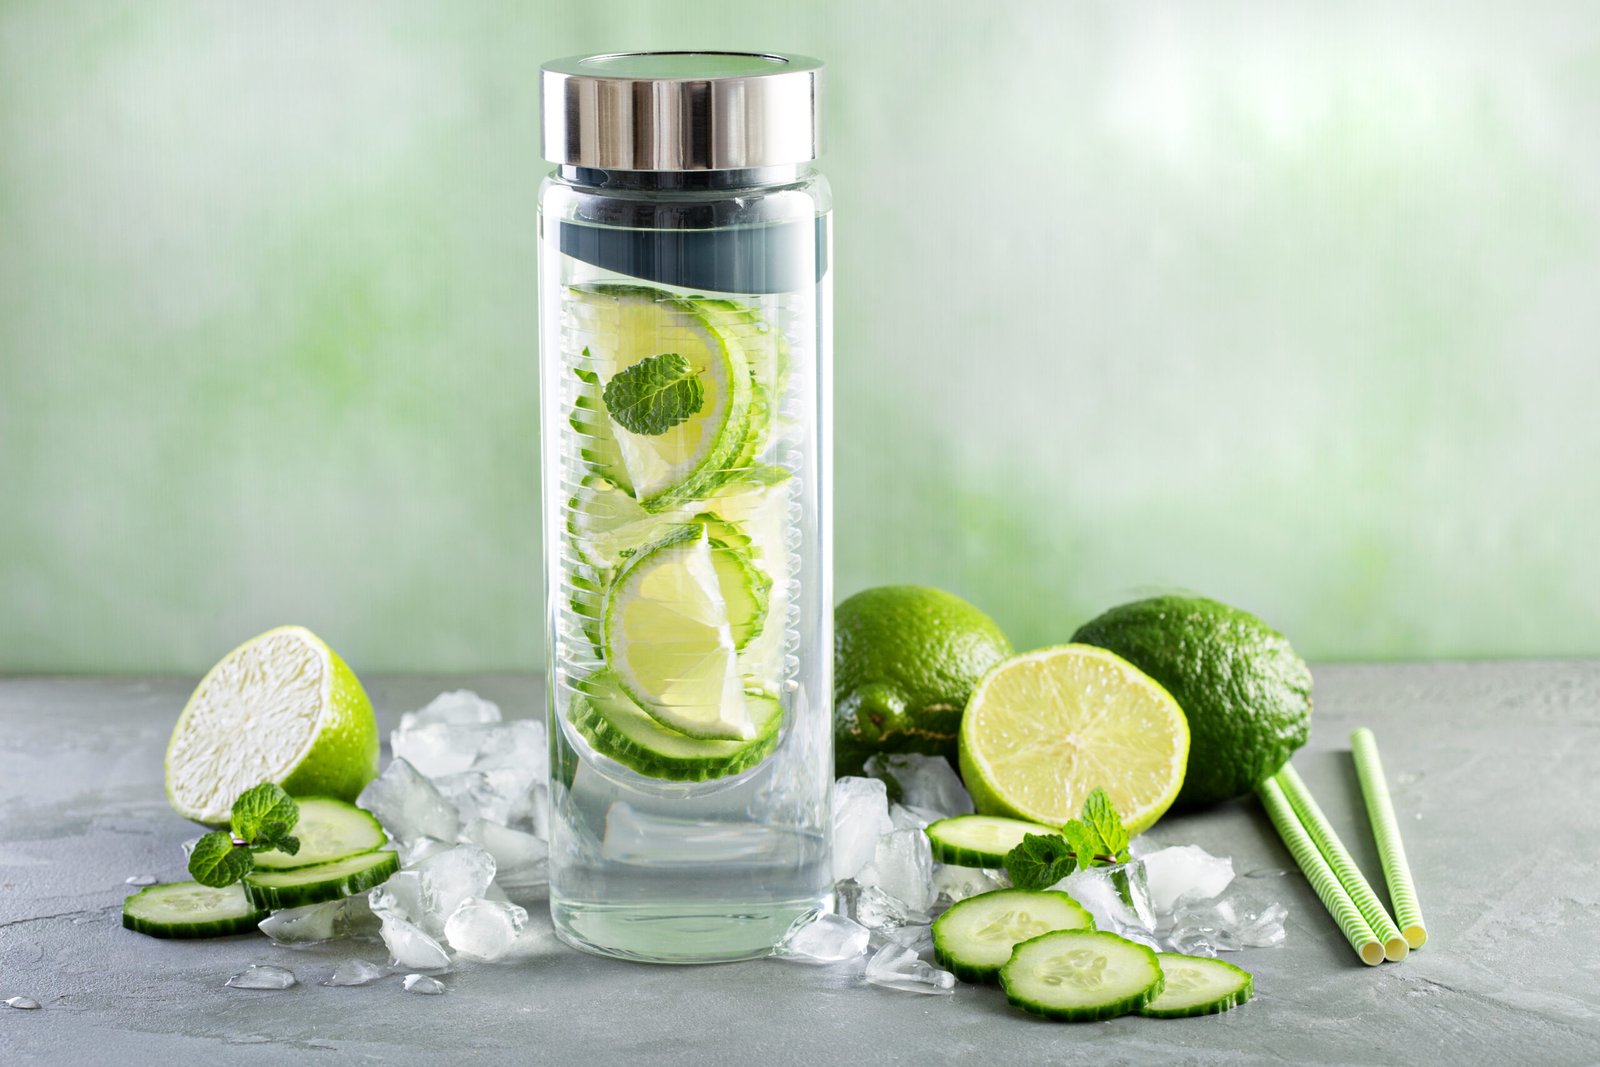 Cold and refreshing infused detox water with lime and cucumber in glass bottle